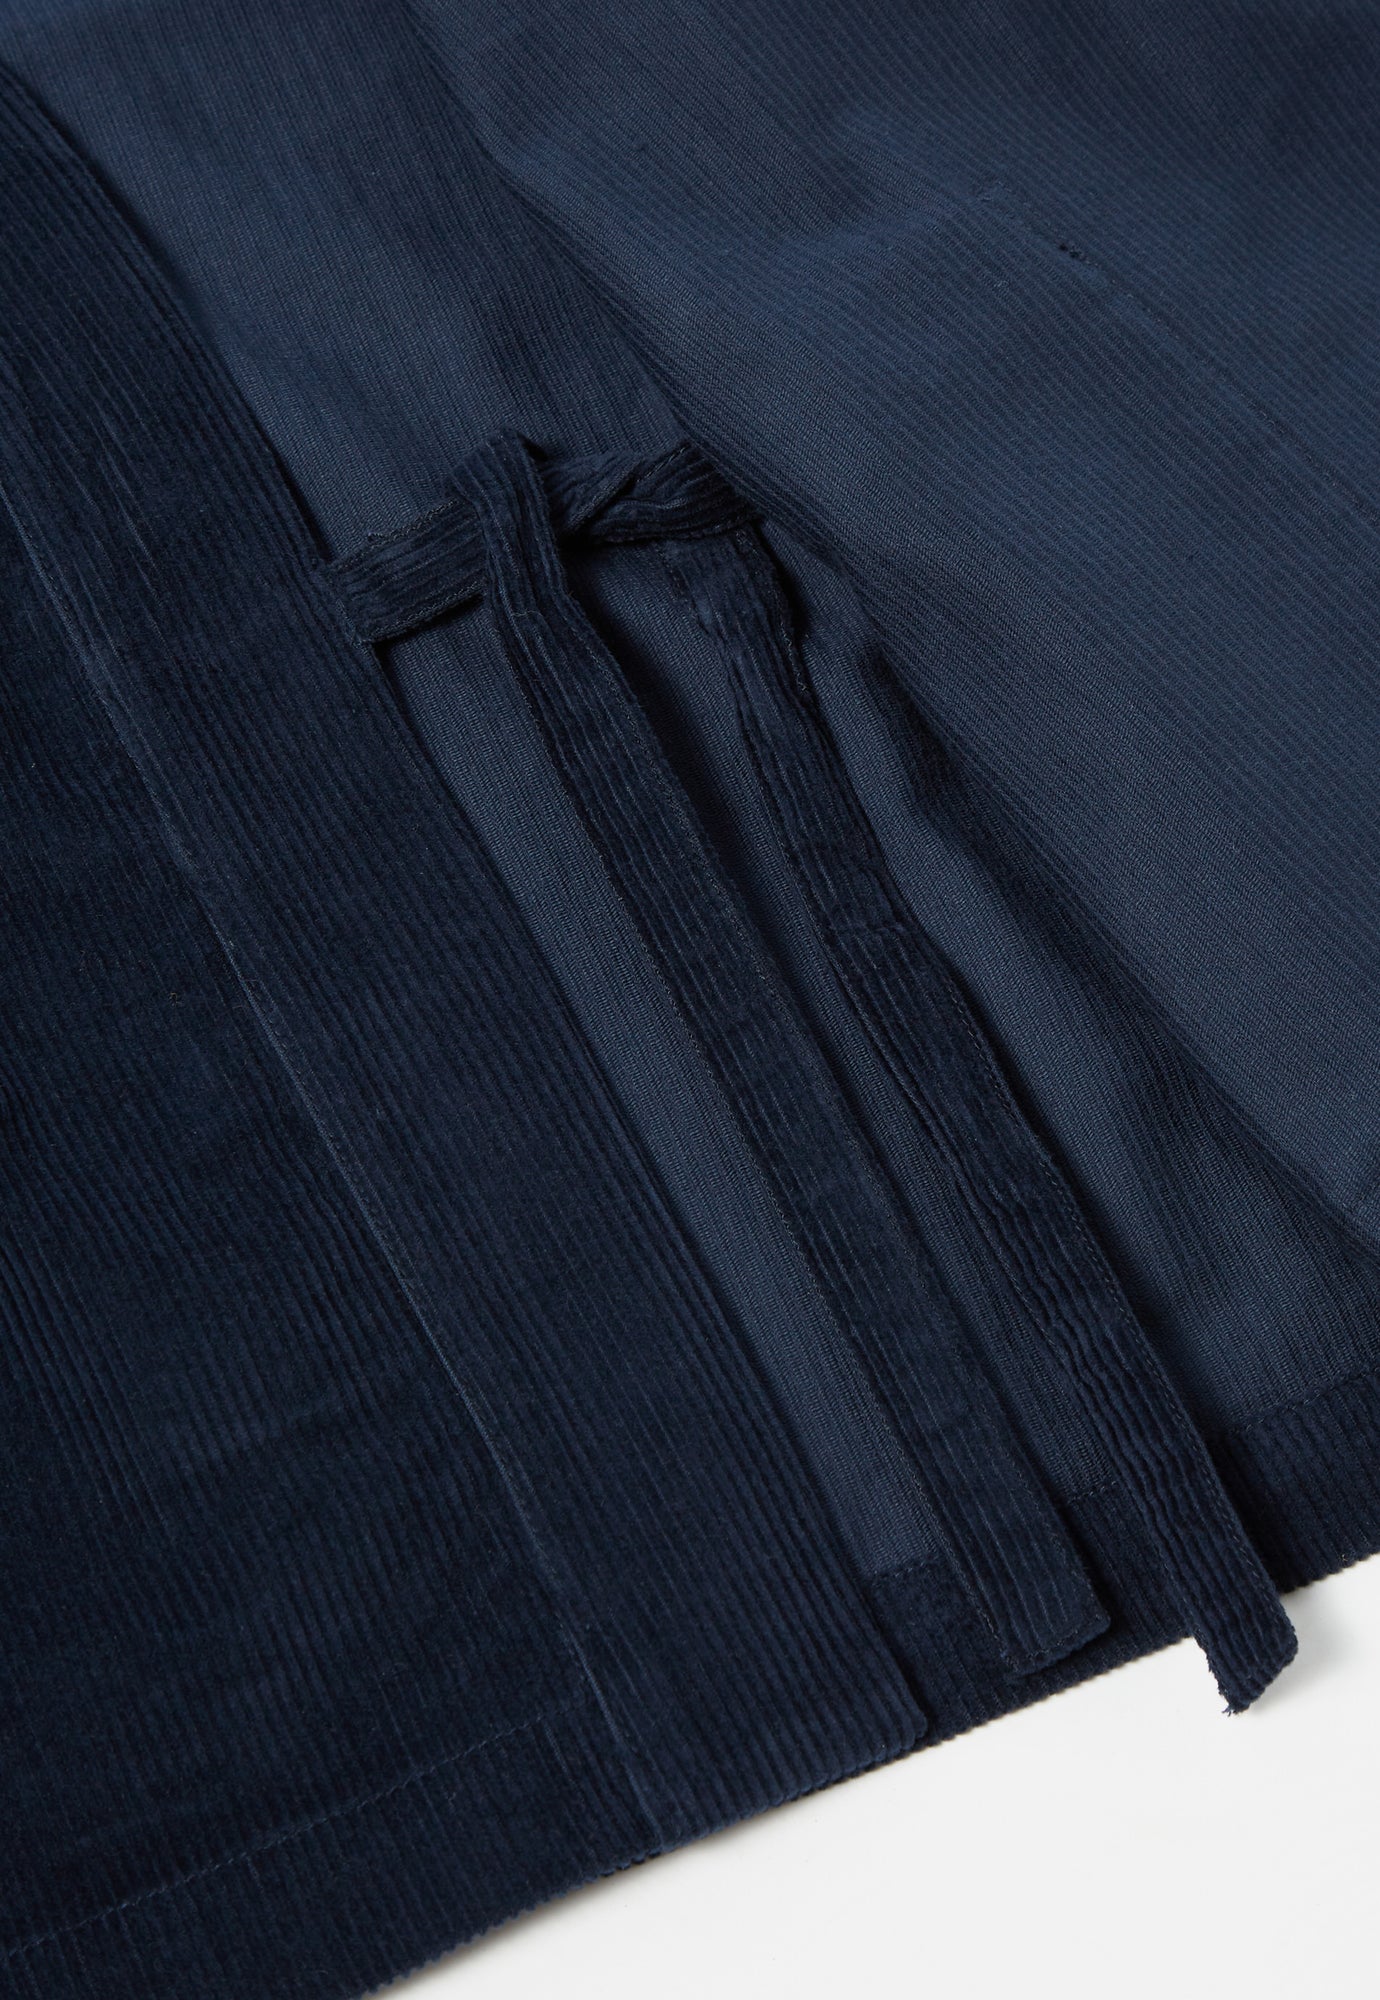 Universal Works Kyoto Work Jacket in Midnight 8 Wale Cord